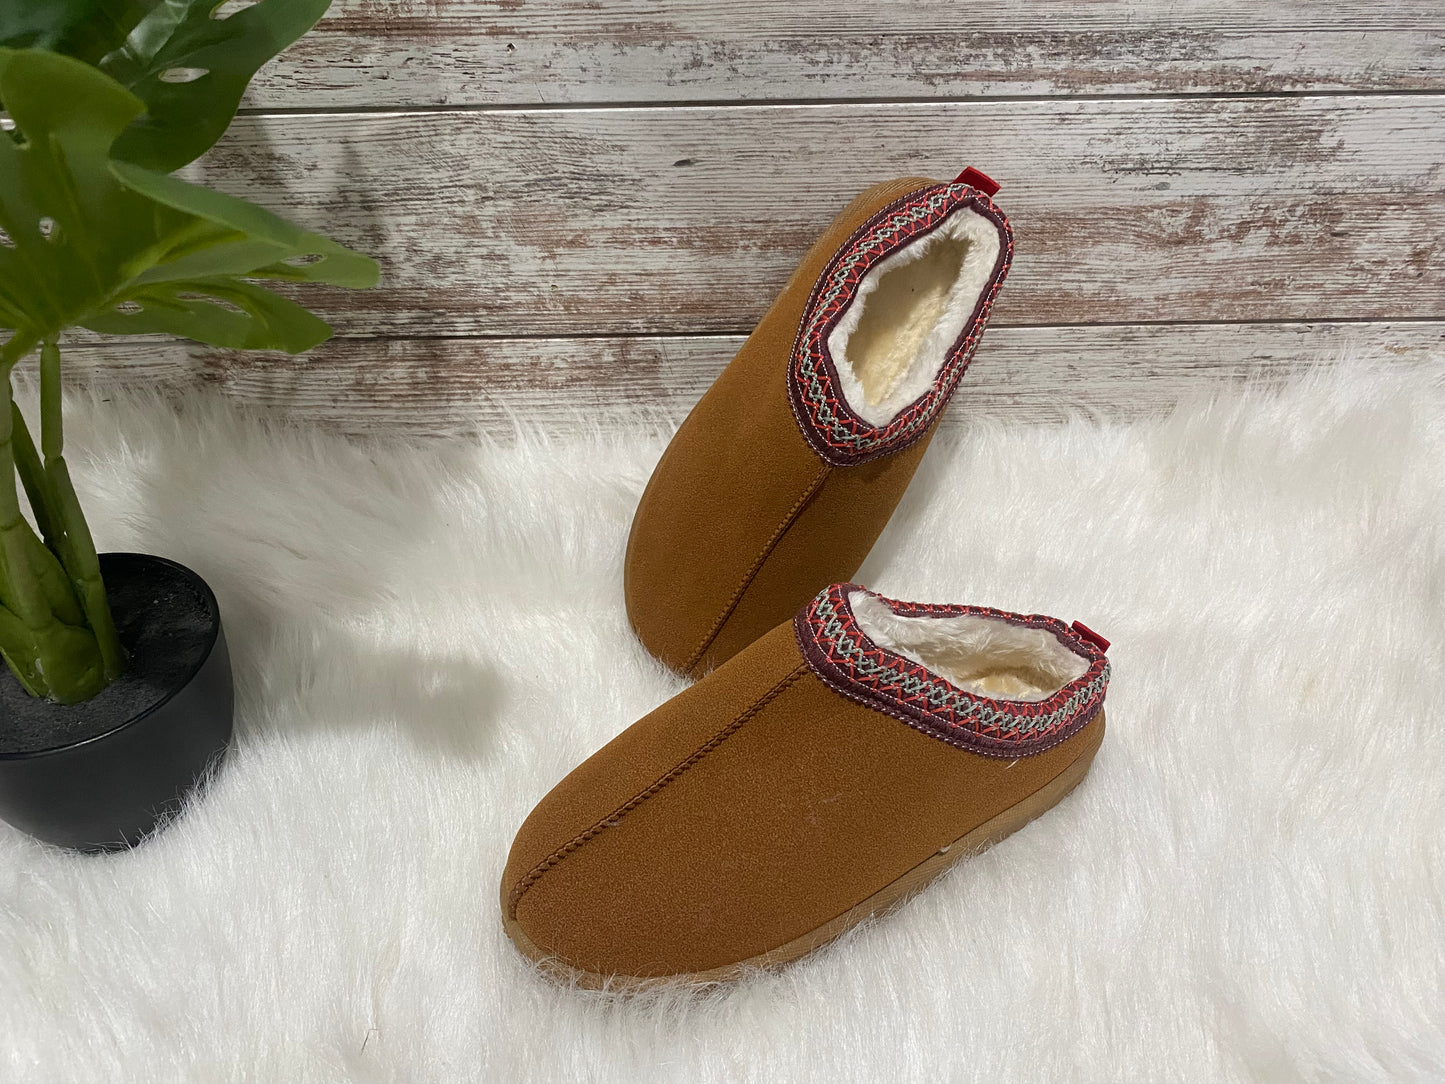 Fur Lined Slip On Shoes - red trim